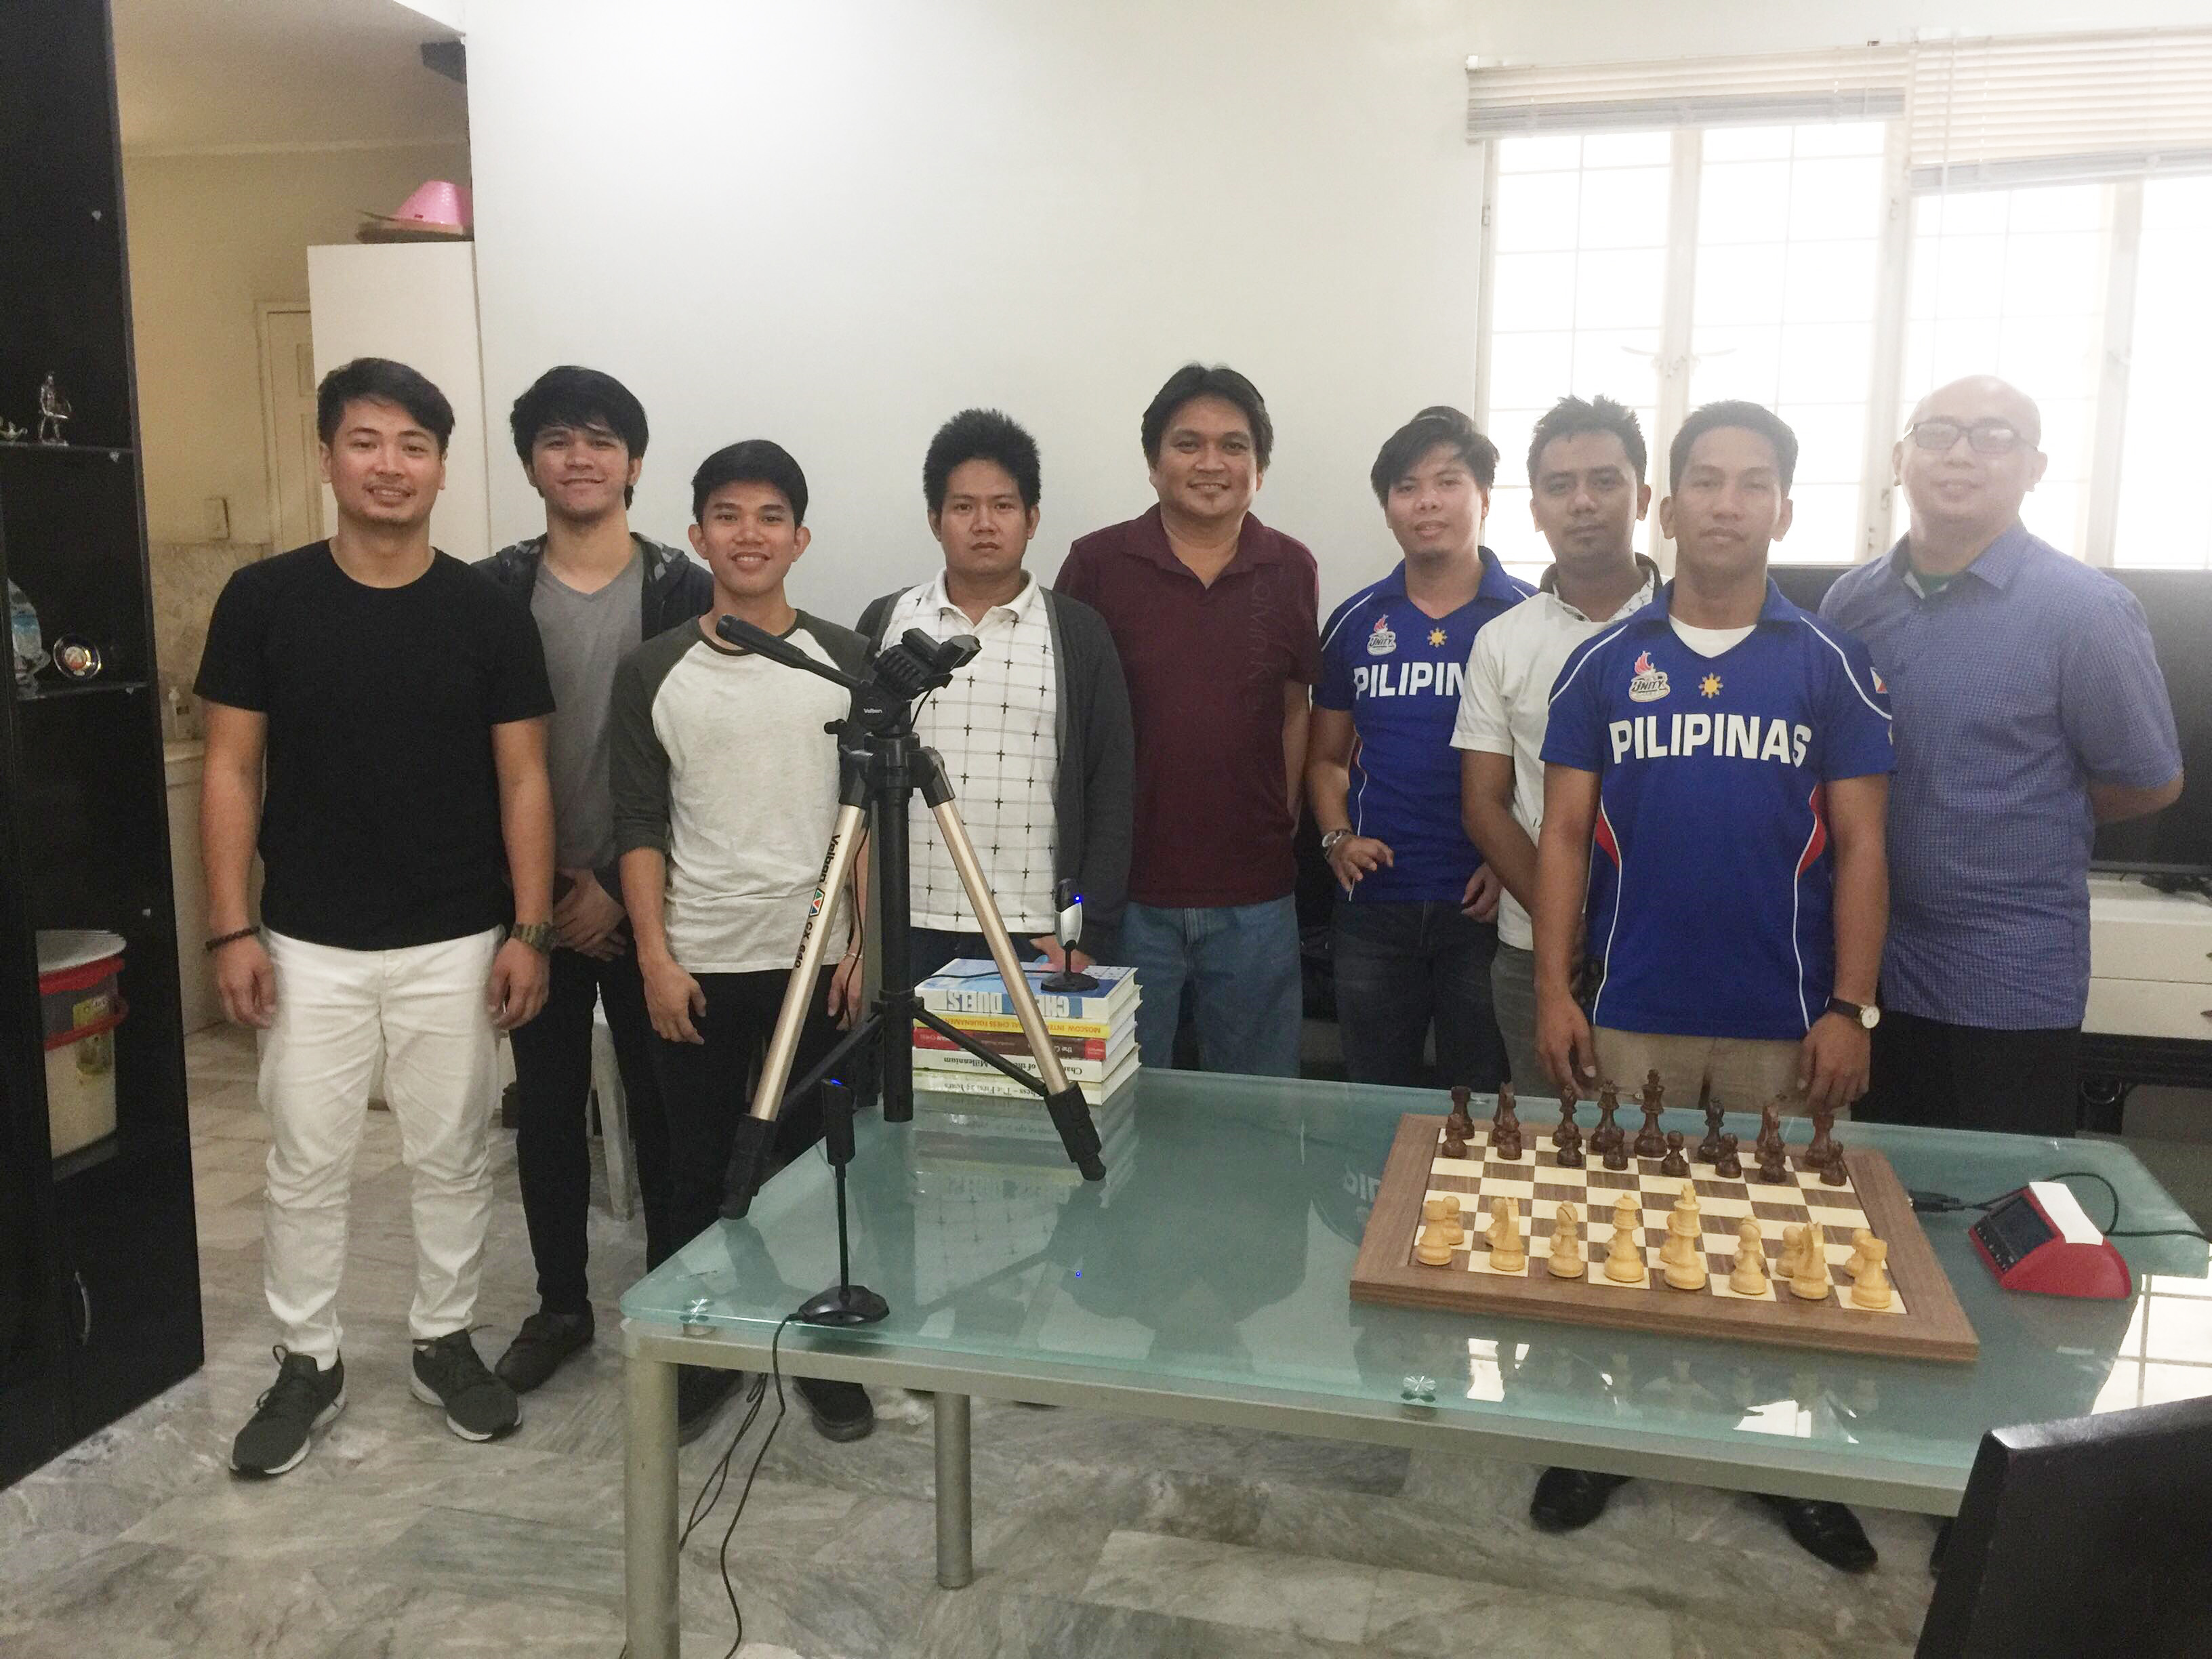 Photo shows Team Manager Christopher "Kuya Chris" De Guzman (center) in a group photo together with from left to right Makoy Mabasa, Tyrone delos Santos and John Michael Magpily, Walt Talan of Knights of Columbus chess team, Narguingel Reyes, Alexis Emil Maribao, Genghis Katipunan Imperial and Ravel Canlas of Iglesia ni Cristo Chess Team during the National Chess Federation of the Philippines (NCFP) team tournament last Saturday, March 17, 2018. All games broadcast live worldwide through the Youtube channel of the National Chess Federation of the Philippines (NCFP).